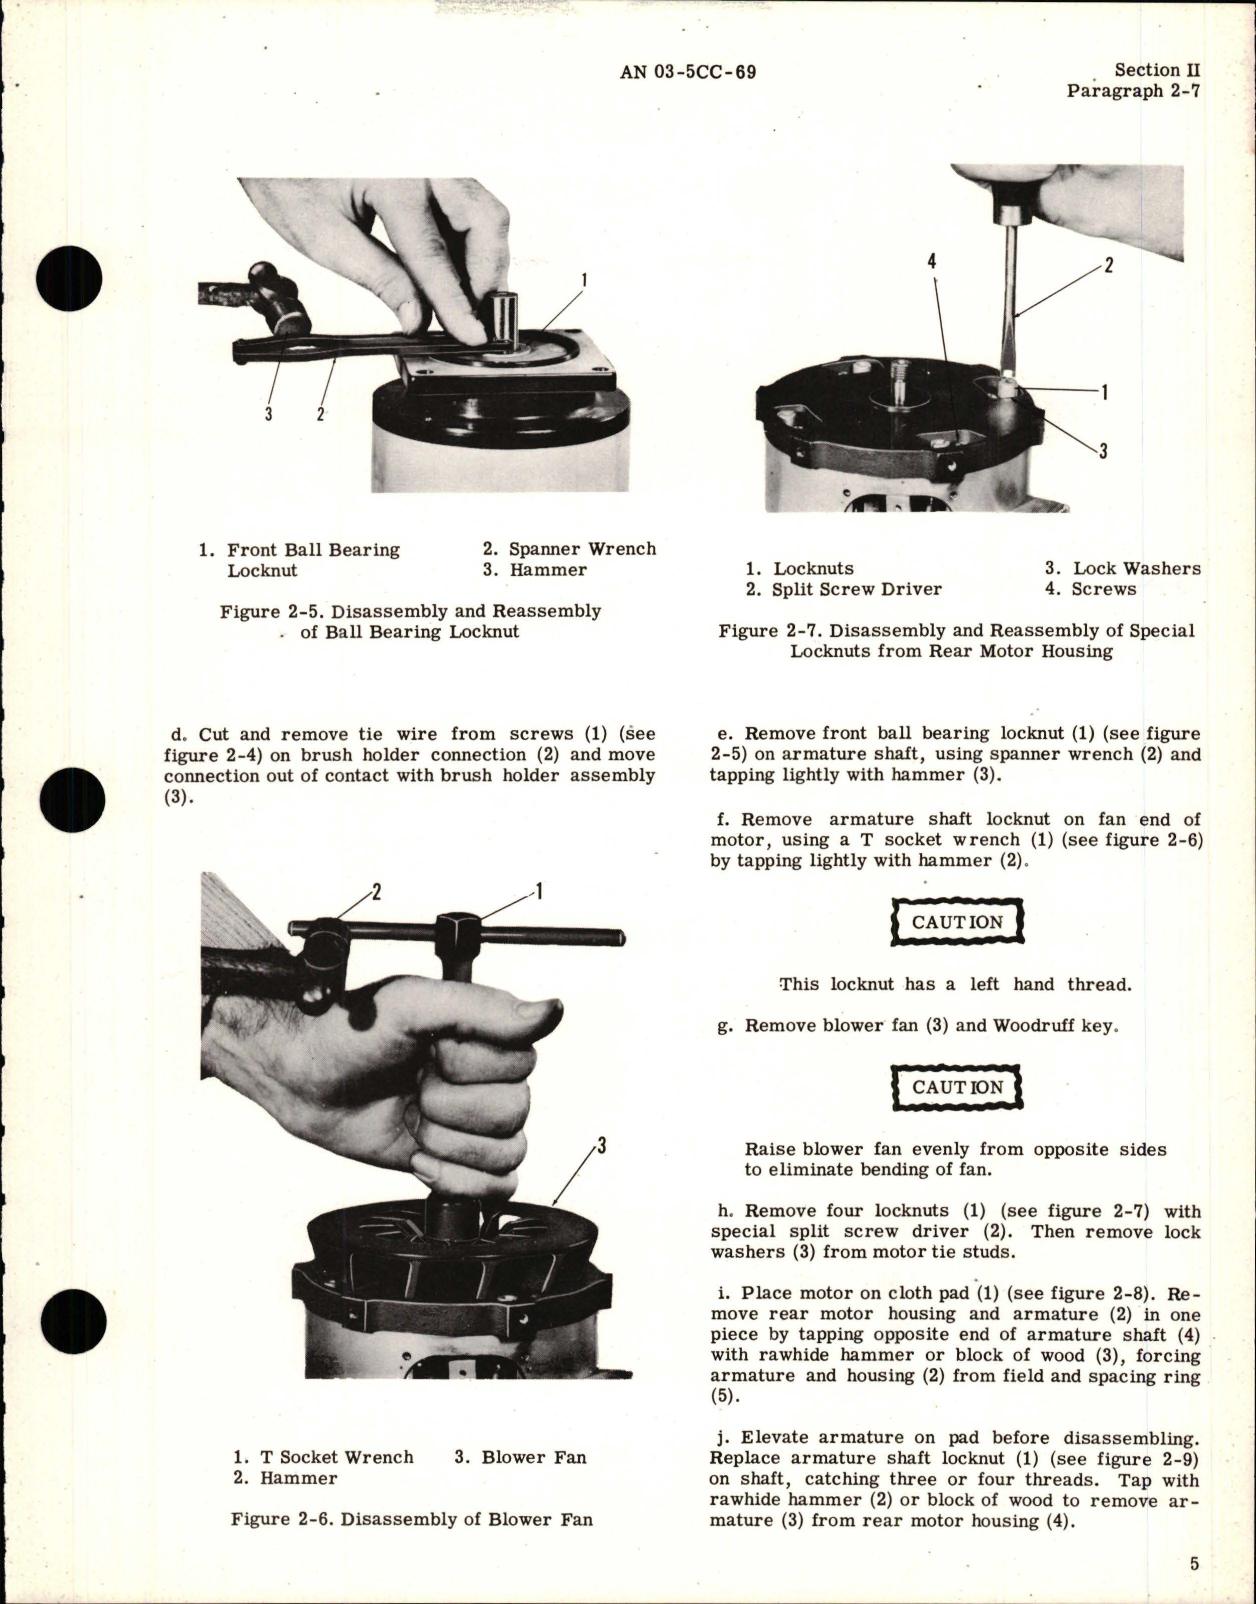 Sample page 9 from AirCorps Library document: Overhaul Instructions for Electric Motors - Models BM517-2, -5, -5A, -5B